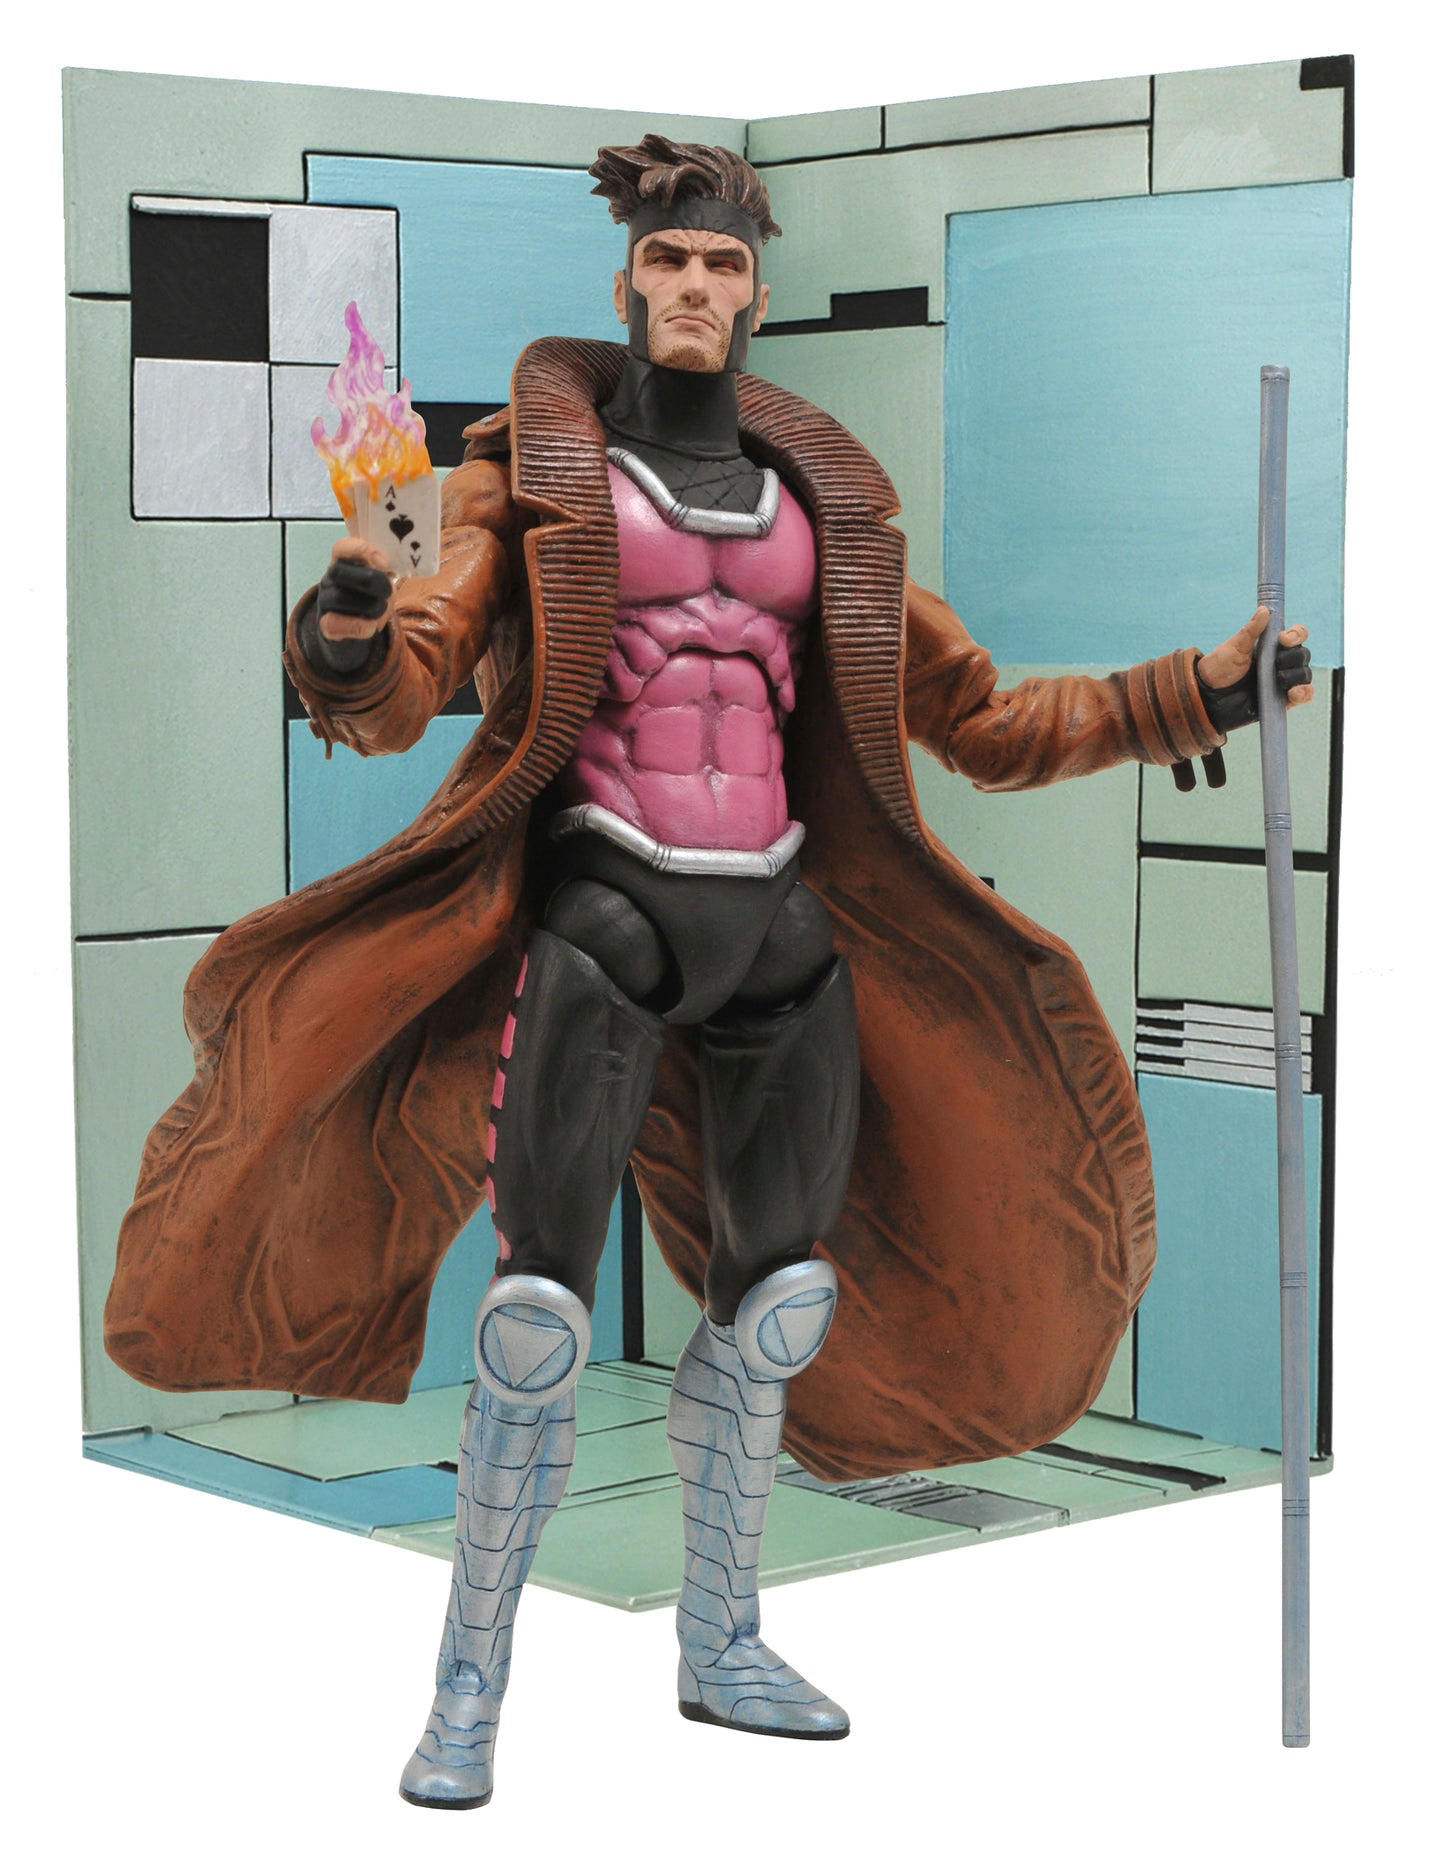 Marvel Select Gambit Action Figure by Diamond Select Toys